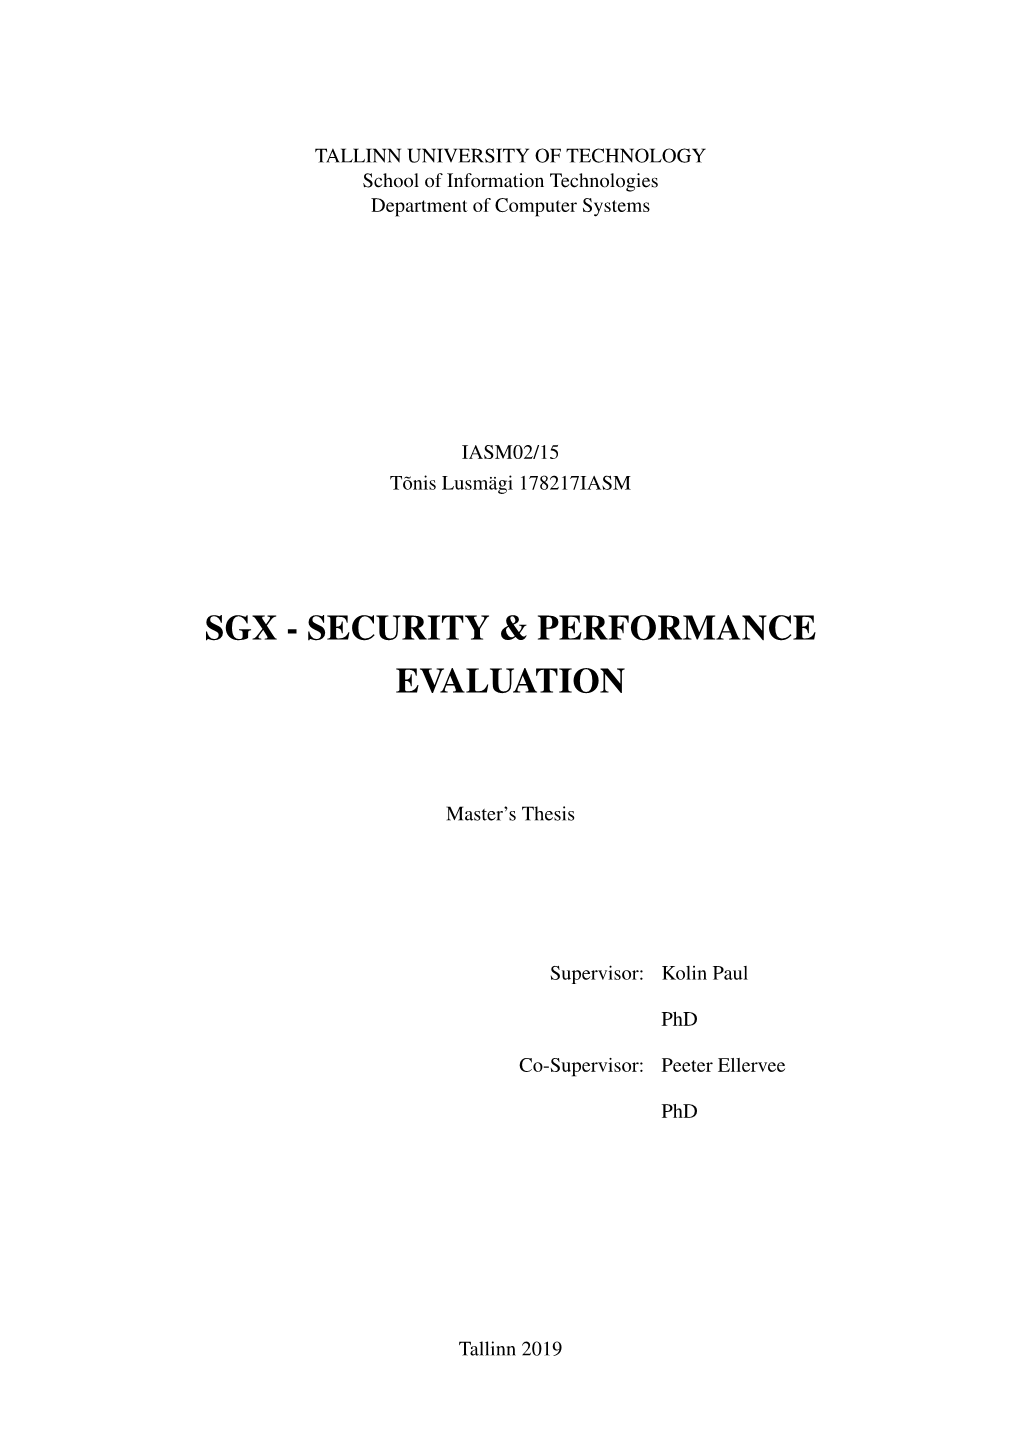 Sgx - Security & Performance Evaluation